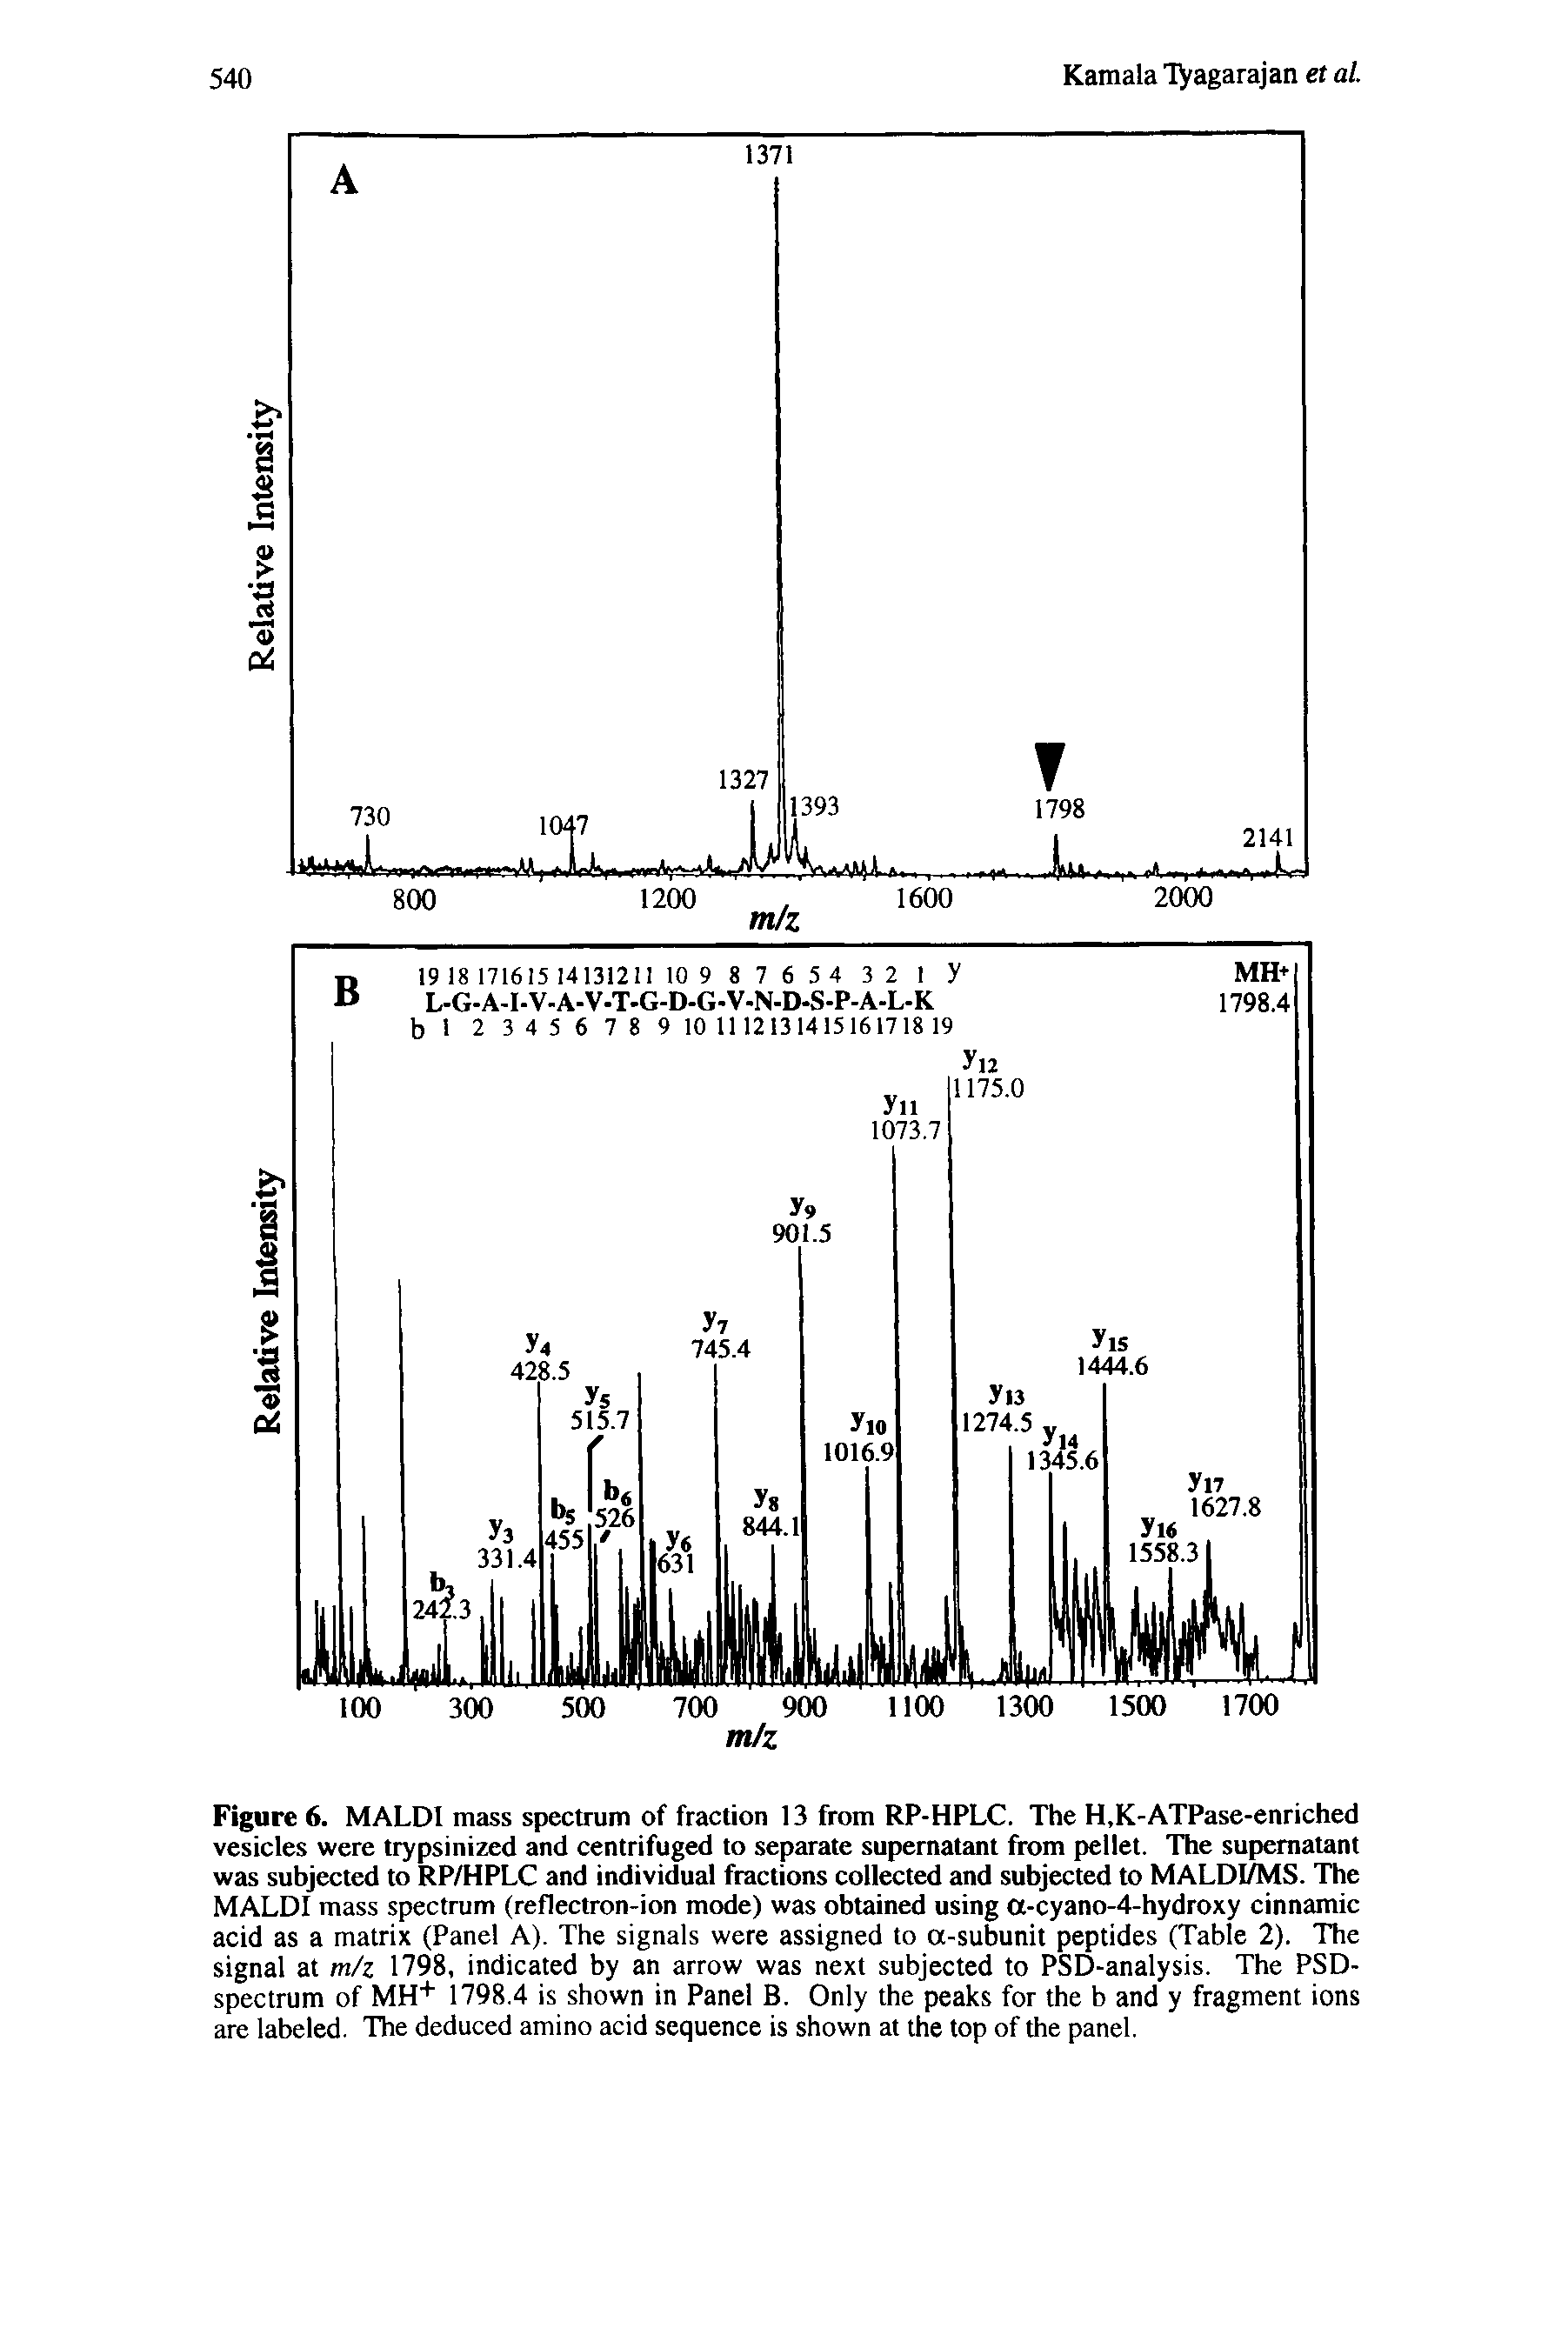 Figure 6. MALDI mass spectrum of fraction 13 from RP-HPLC. The H,K-ATPase-enriched vesicles were trypsinized and centrifuged to separate supernatant from pellet. The supernatant was subjected to RP/HPLC and individual fractions collected and subjected to MALDI/MS. The MALDI mass spectrum (reflectron-ion mode) was obtained using a-cyano-4-hydroxy cinnamic acid as a matrix (Panel A). The signals were assigned to a-subunit peptides (Table 2). The signal at m/z 1798, indicated by an arrow was next subjected to PSD-analysis. The PSD-spectrum of MH+ 1798.4 is shown in Panel B. Only the peaks for the b and y fragment ions are labeled. The deduced amino acid sequence is shown at the top of the panel.